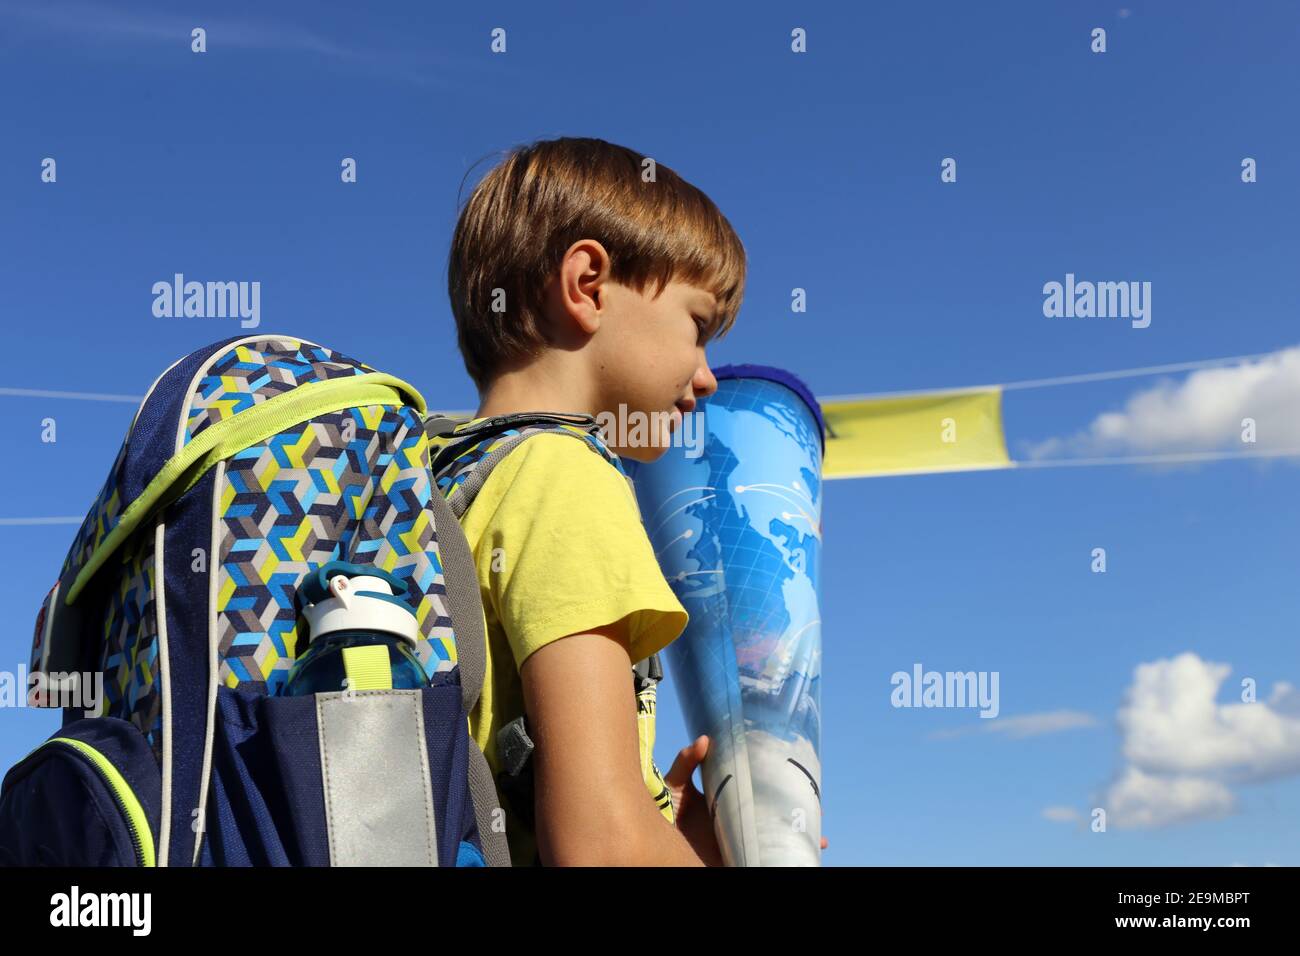 Symbol image: Boy on his way to his first day of school (model released) Stock Photo